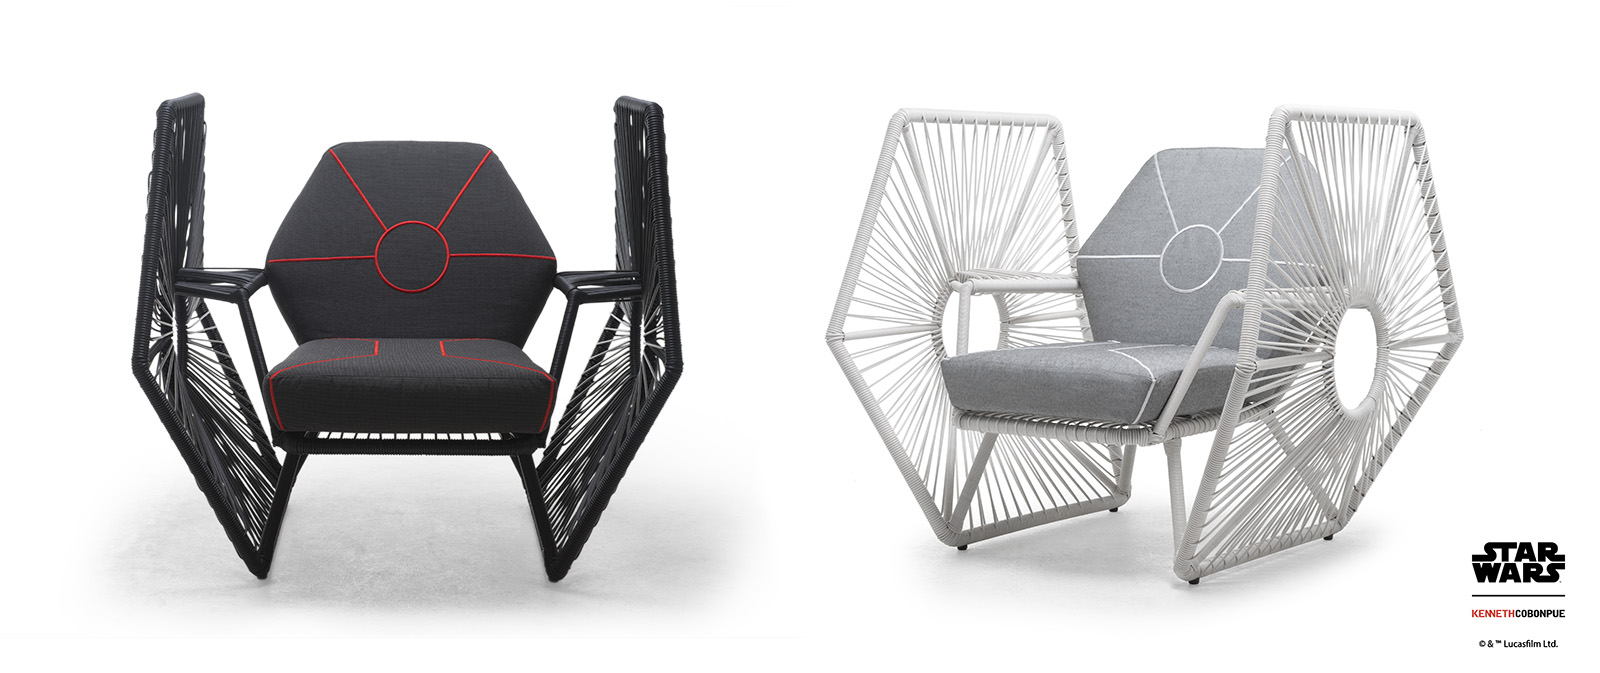 Star Wars Home Collection From Kenneth Cobonque Rules The Galaxy